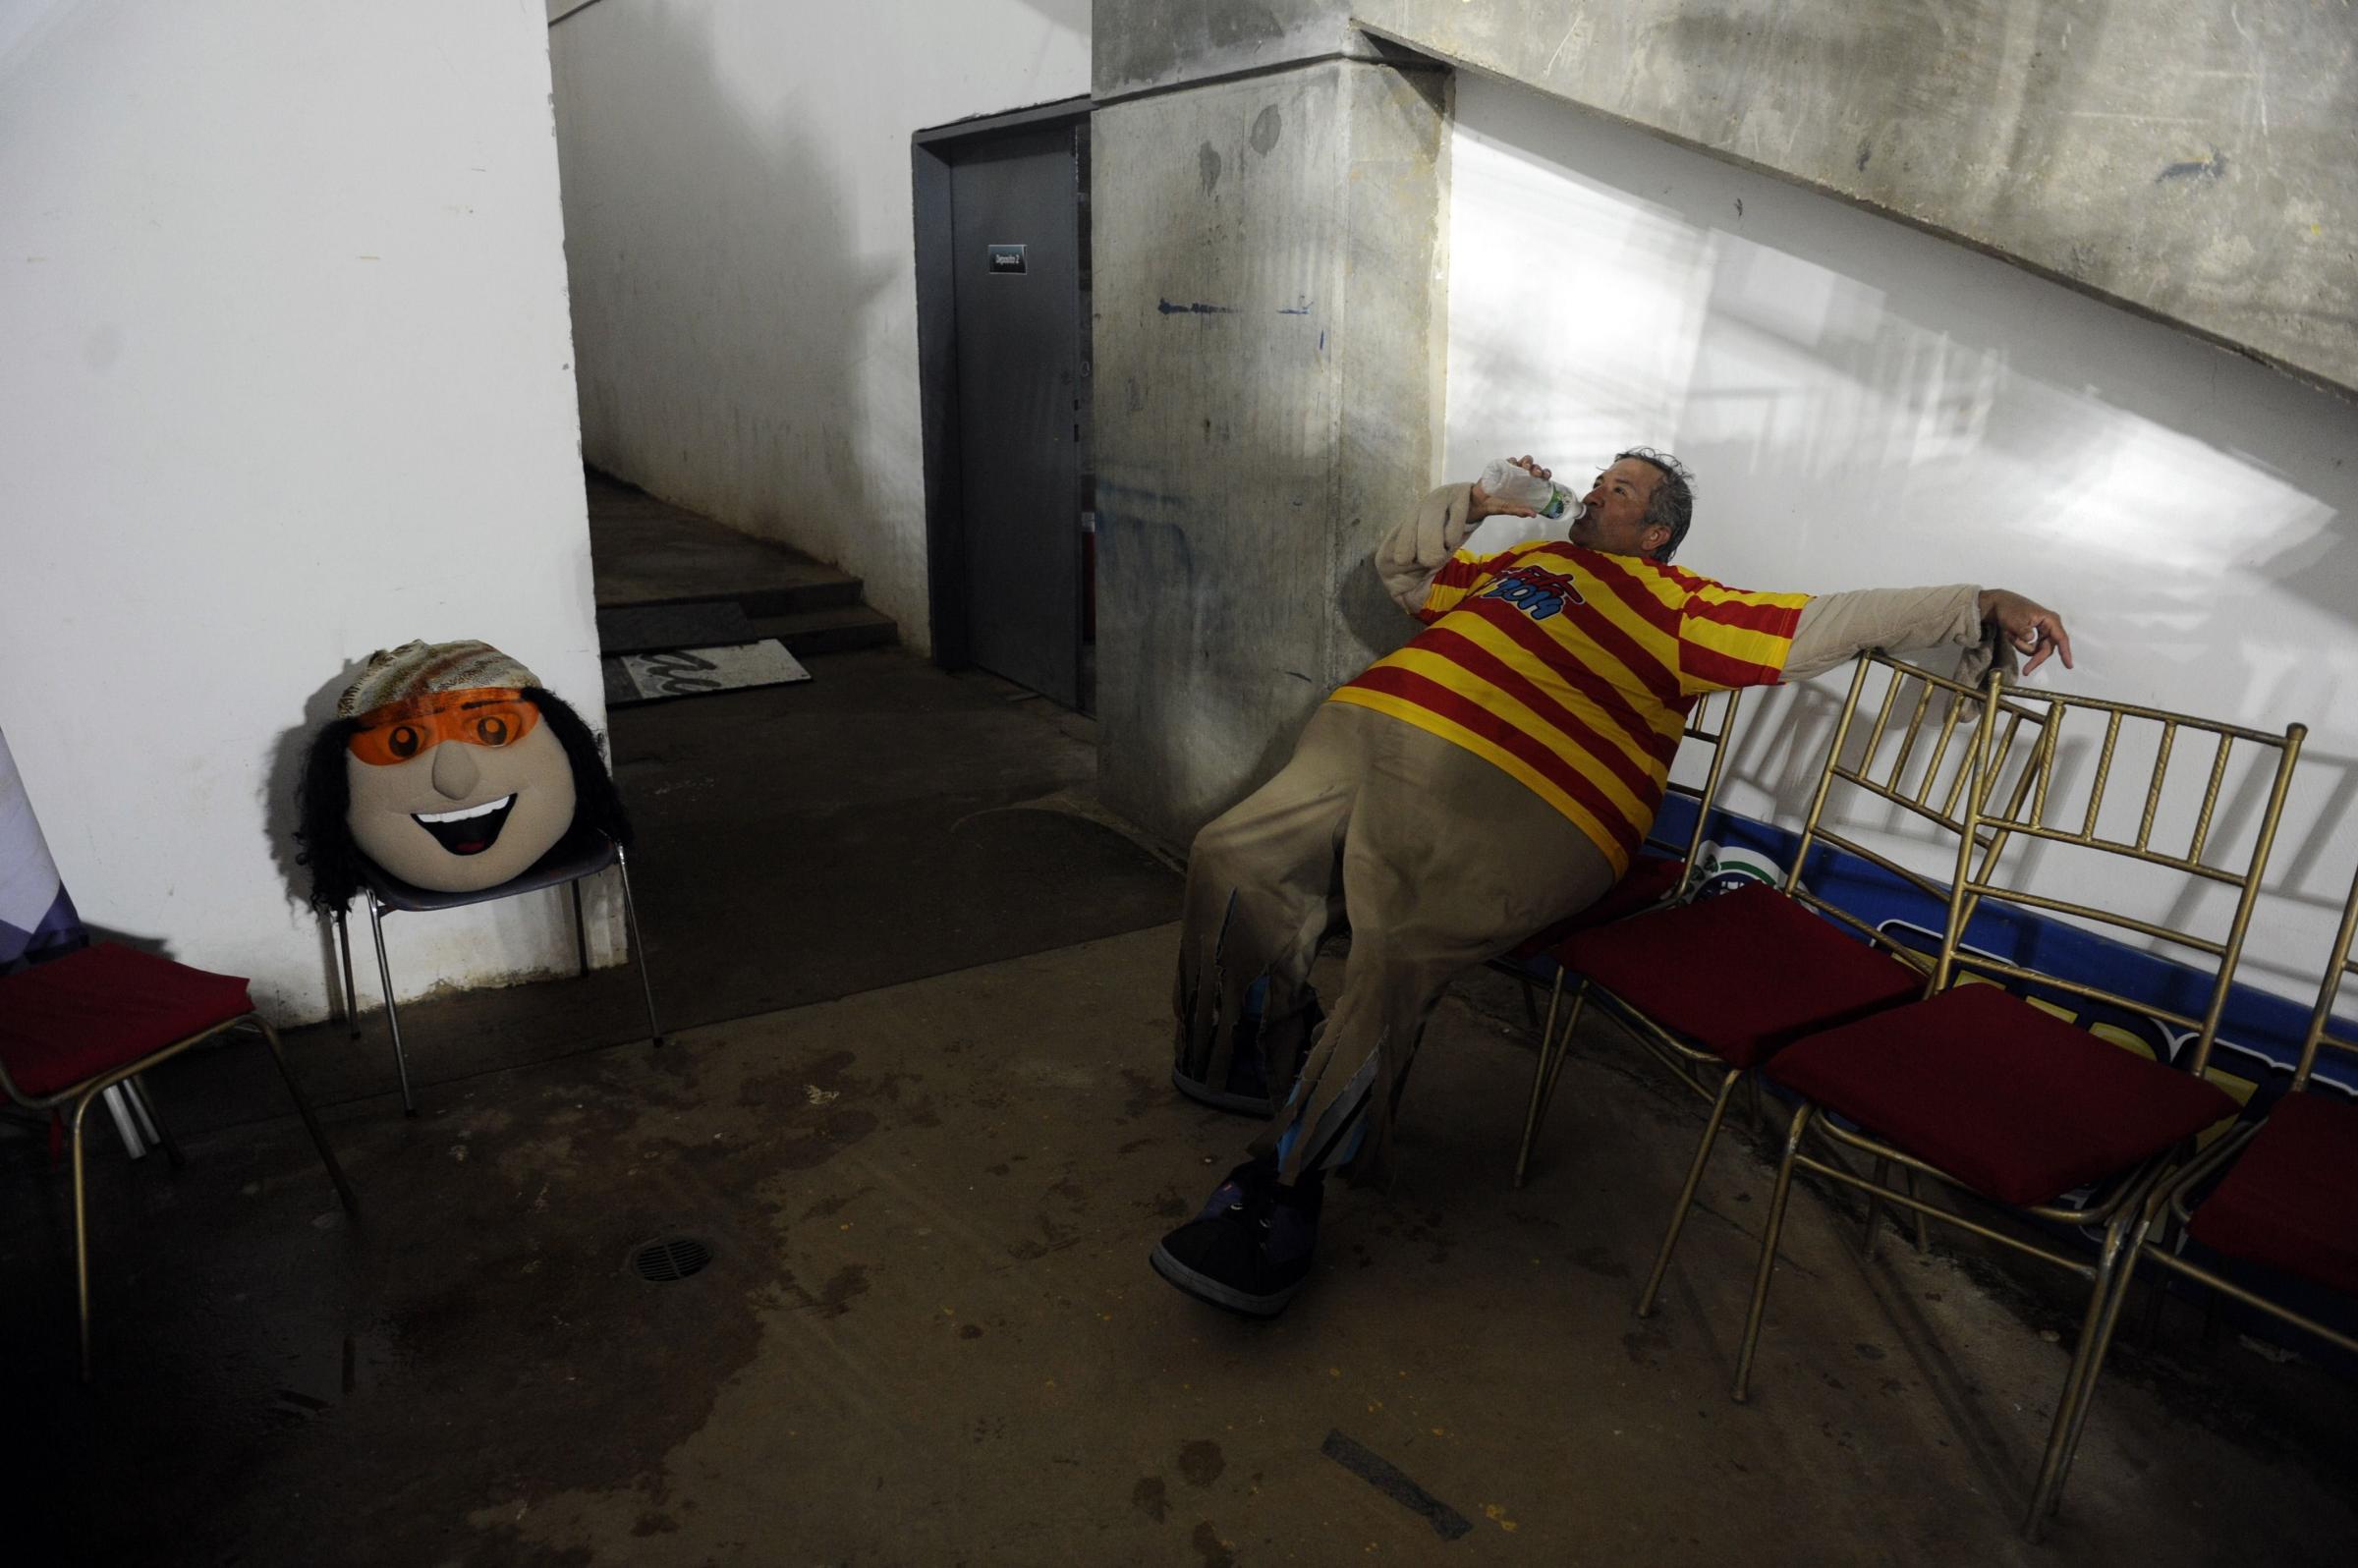 The man that works as the mascot "Margarito" for the 2014 Caribbean baseball series rests backstage during the game between Dominican Republic's Tigres de Licey and Venezuela's Navegantes del Magallanes, on Feb. 4, 2014, in Porlamar City, Margarita Island, Nueva Esparta state, Venezuela.